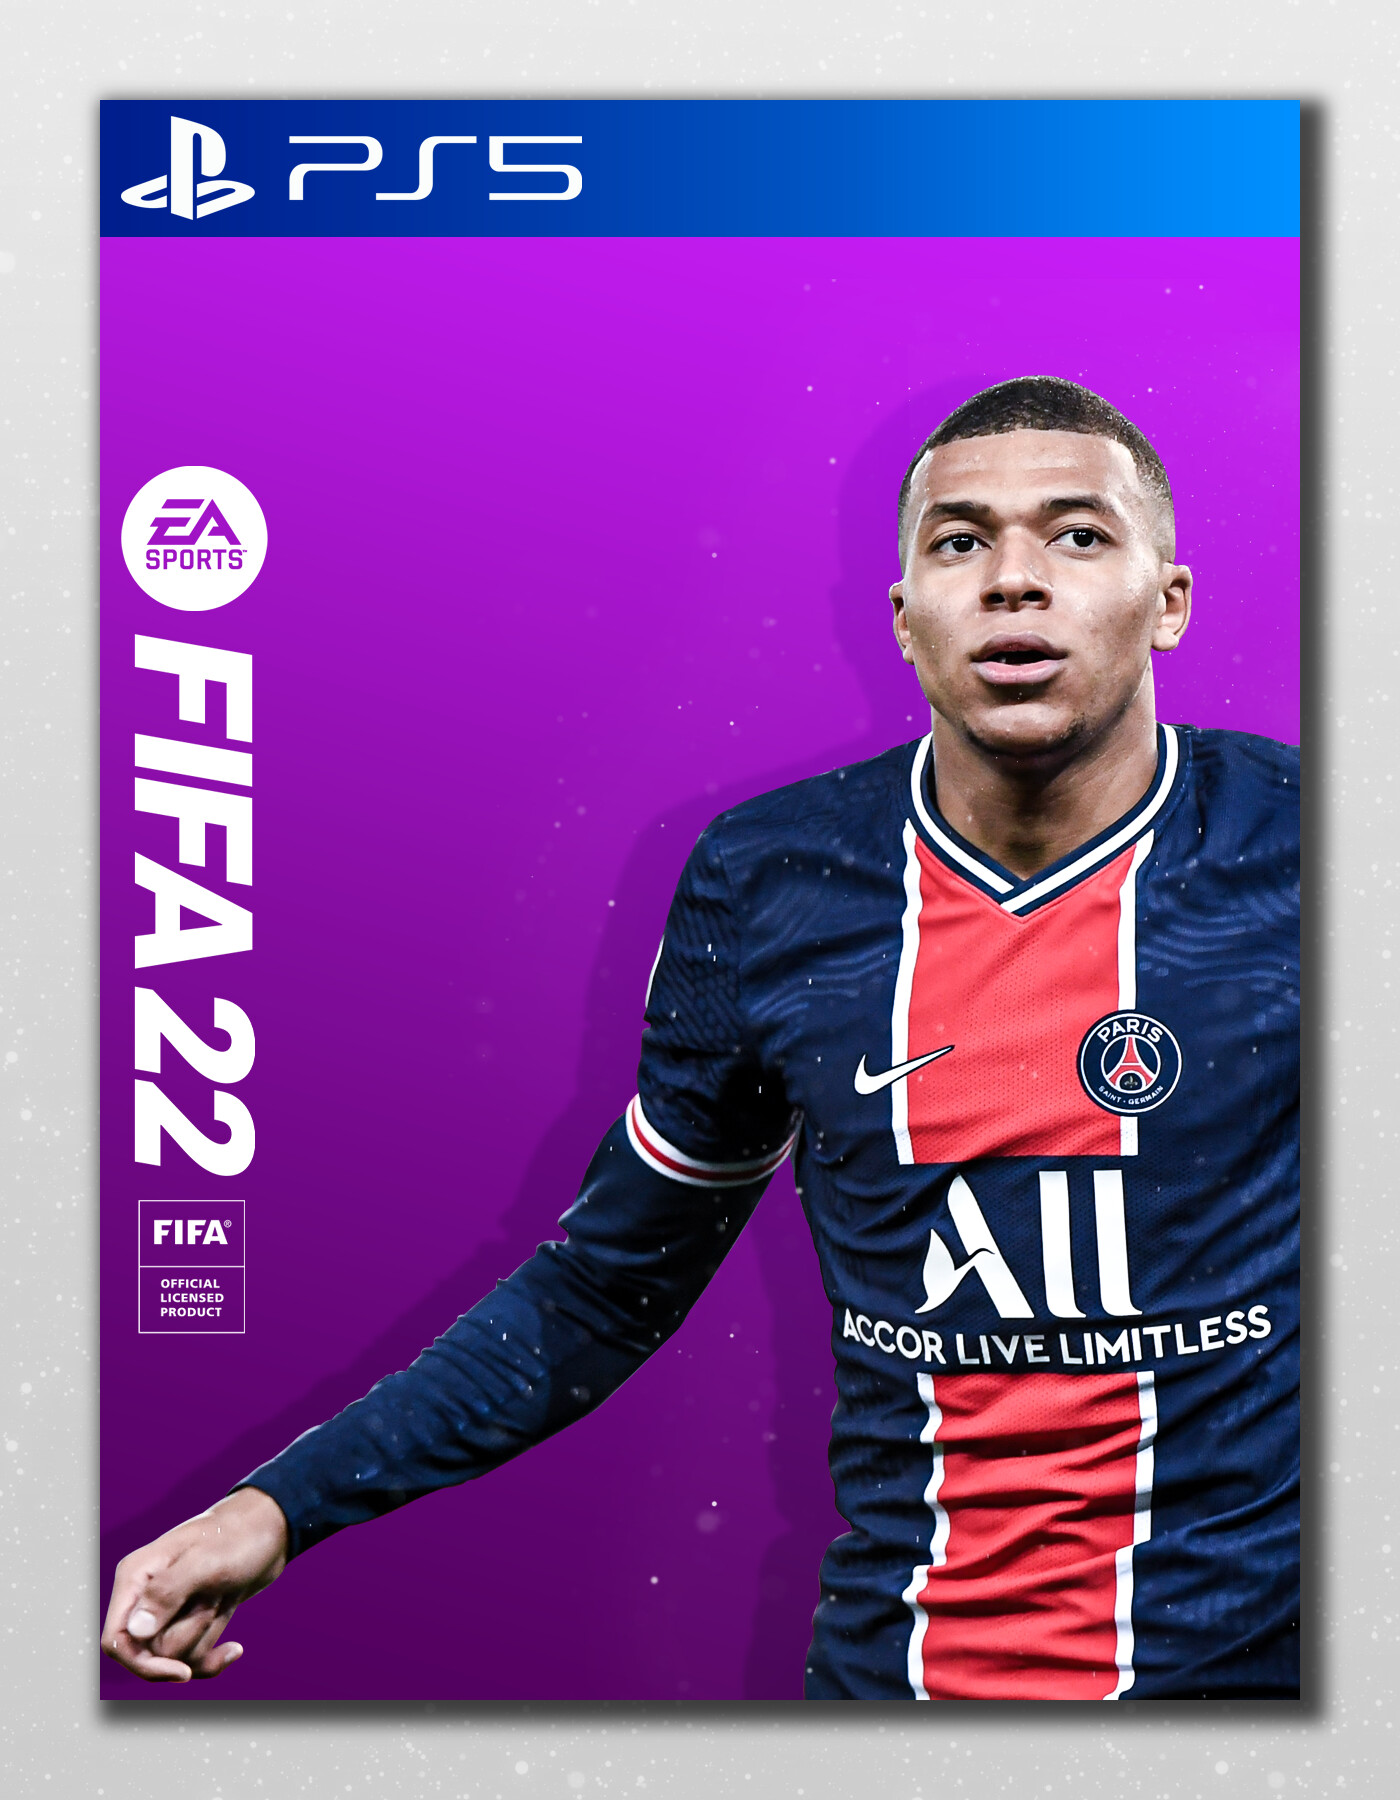 Electronic Arts FIFA 22 for PlayStation 5